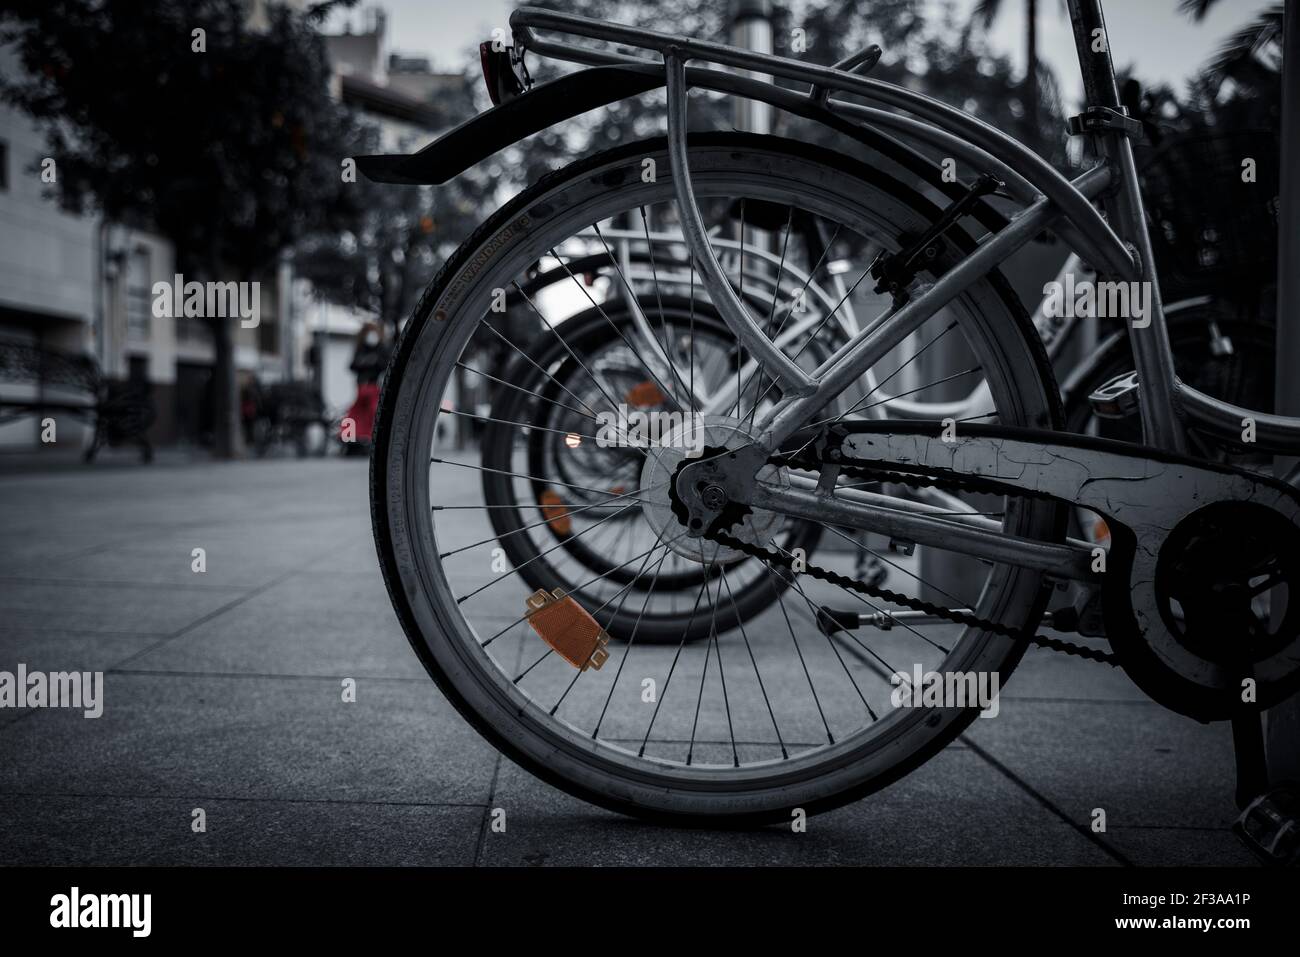 Bicycle parking Stock Photo